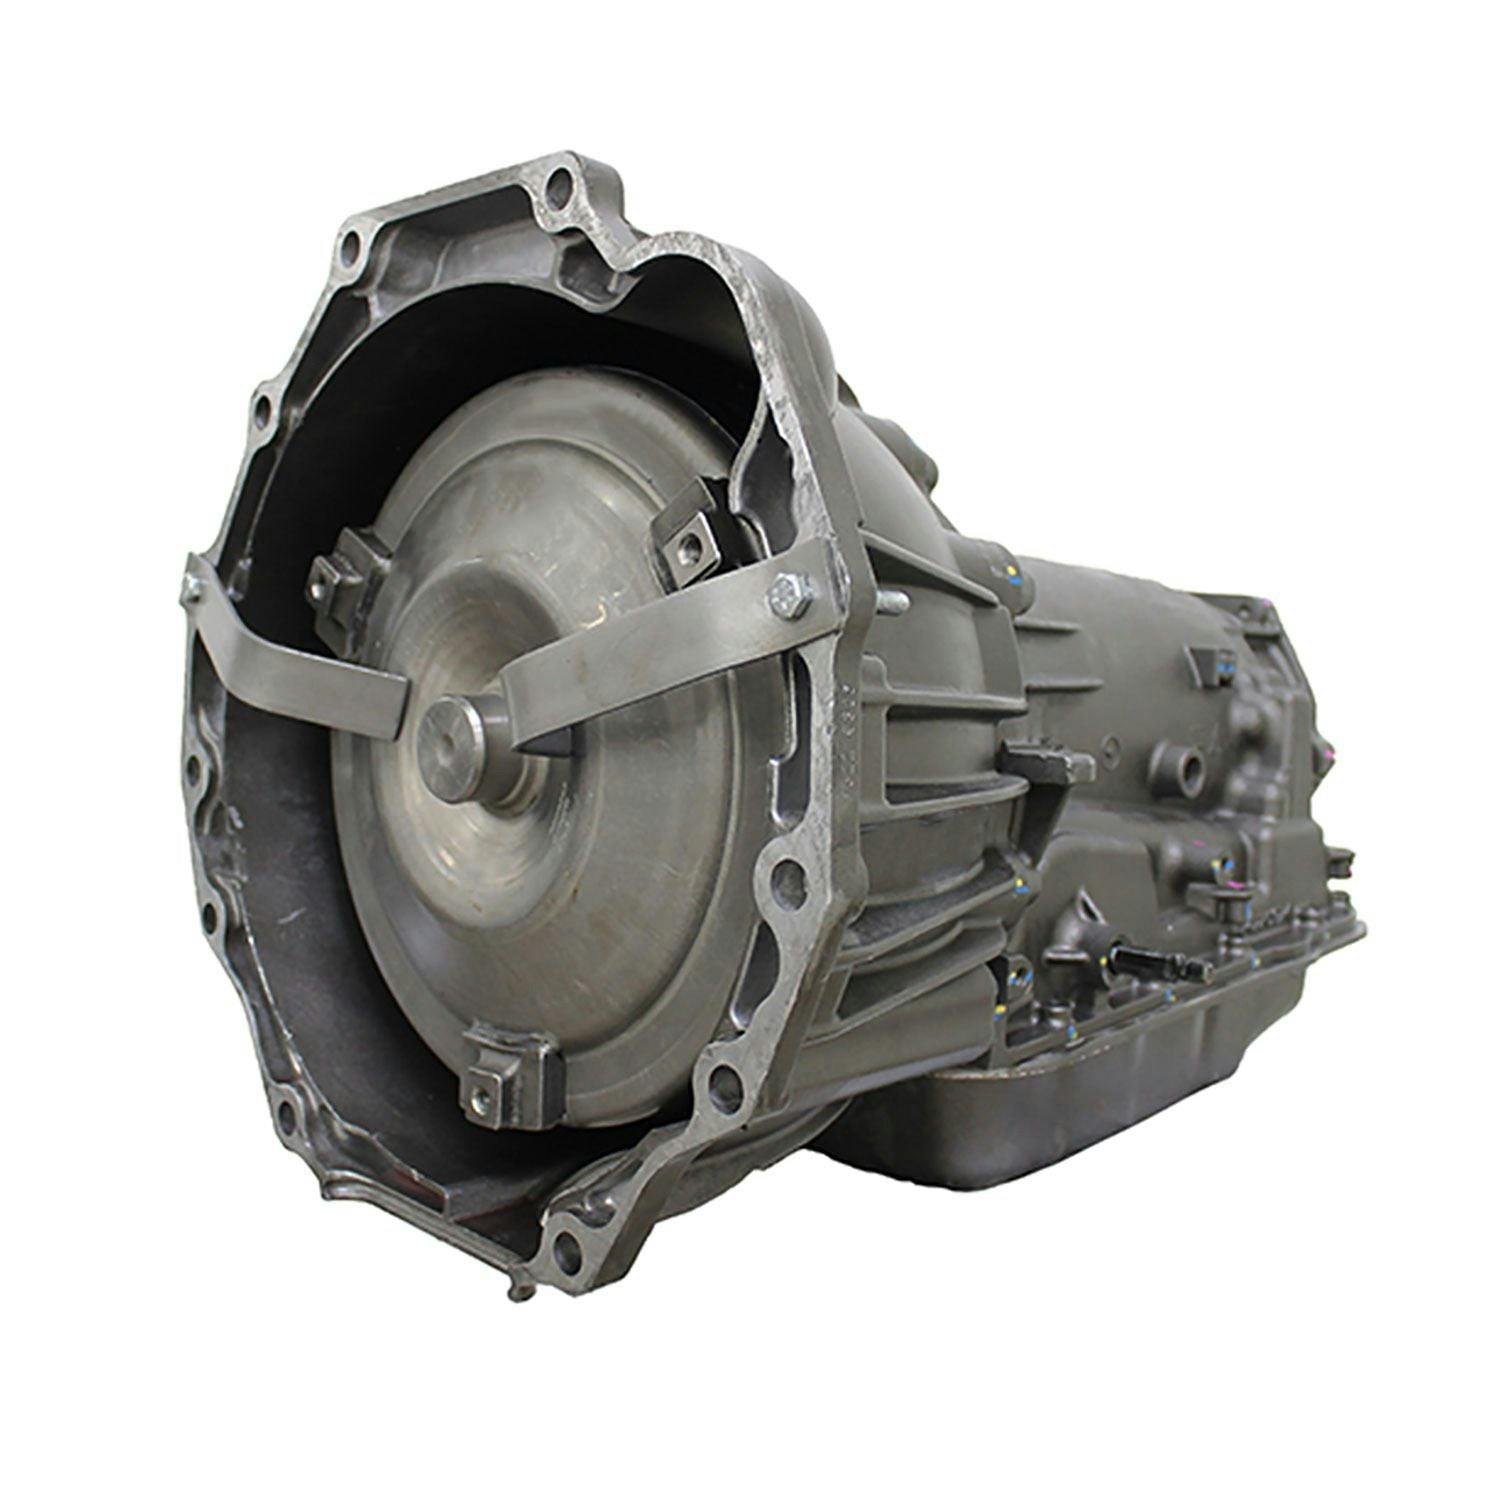 Automatic Transmission for 2004 Chevrolet Colorado/GMC Canyon RWD with 2.8L Inline-4 Engine